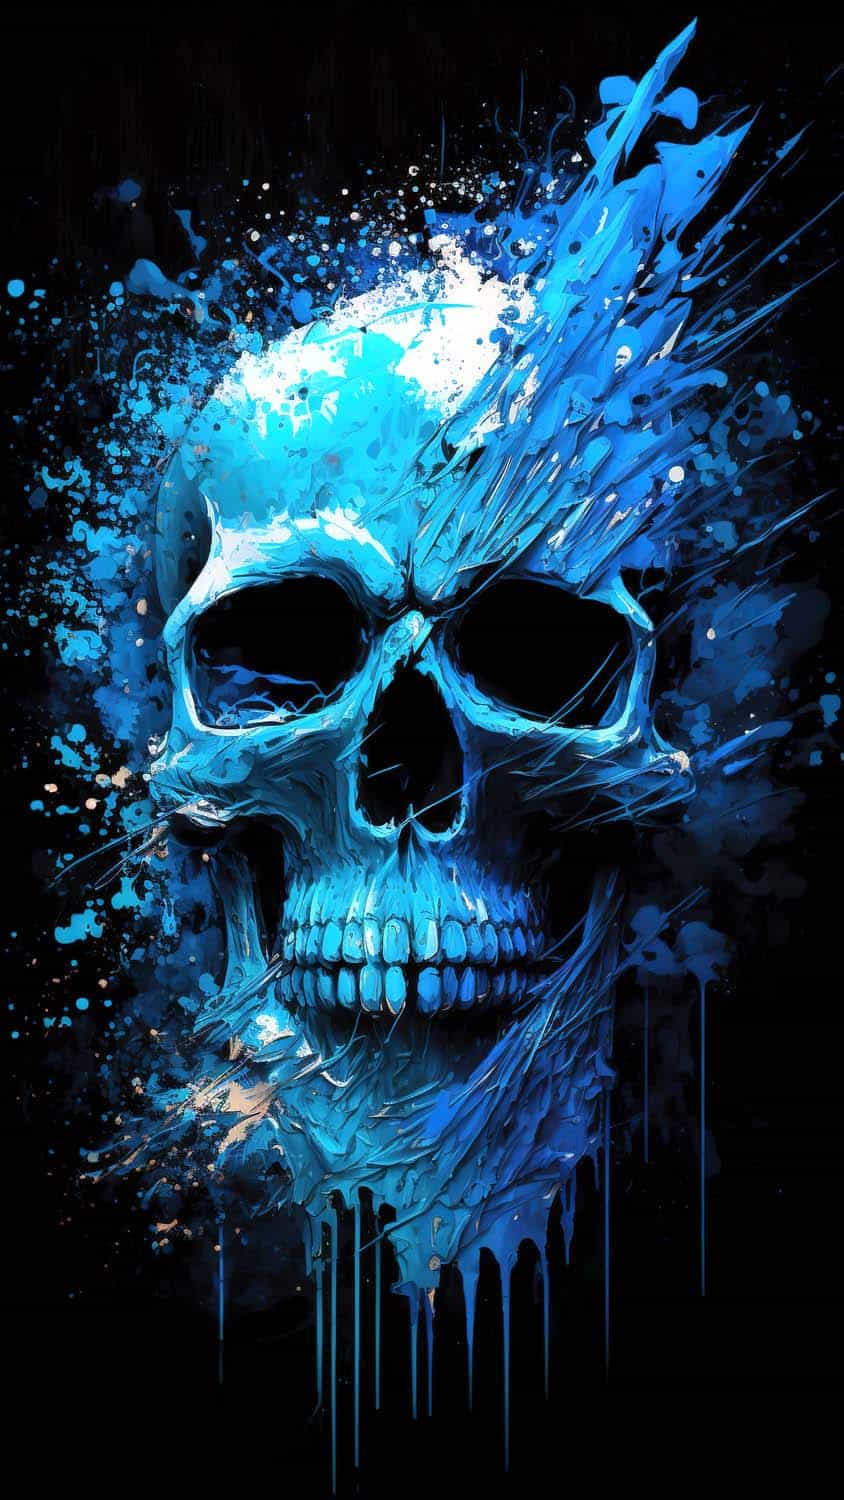 Skull Wallpaper For IPhone 67 images